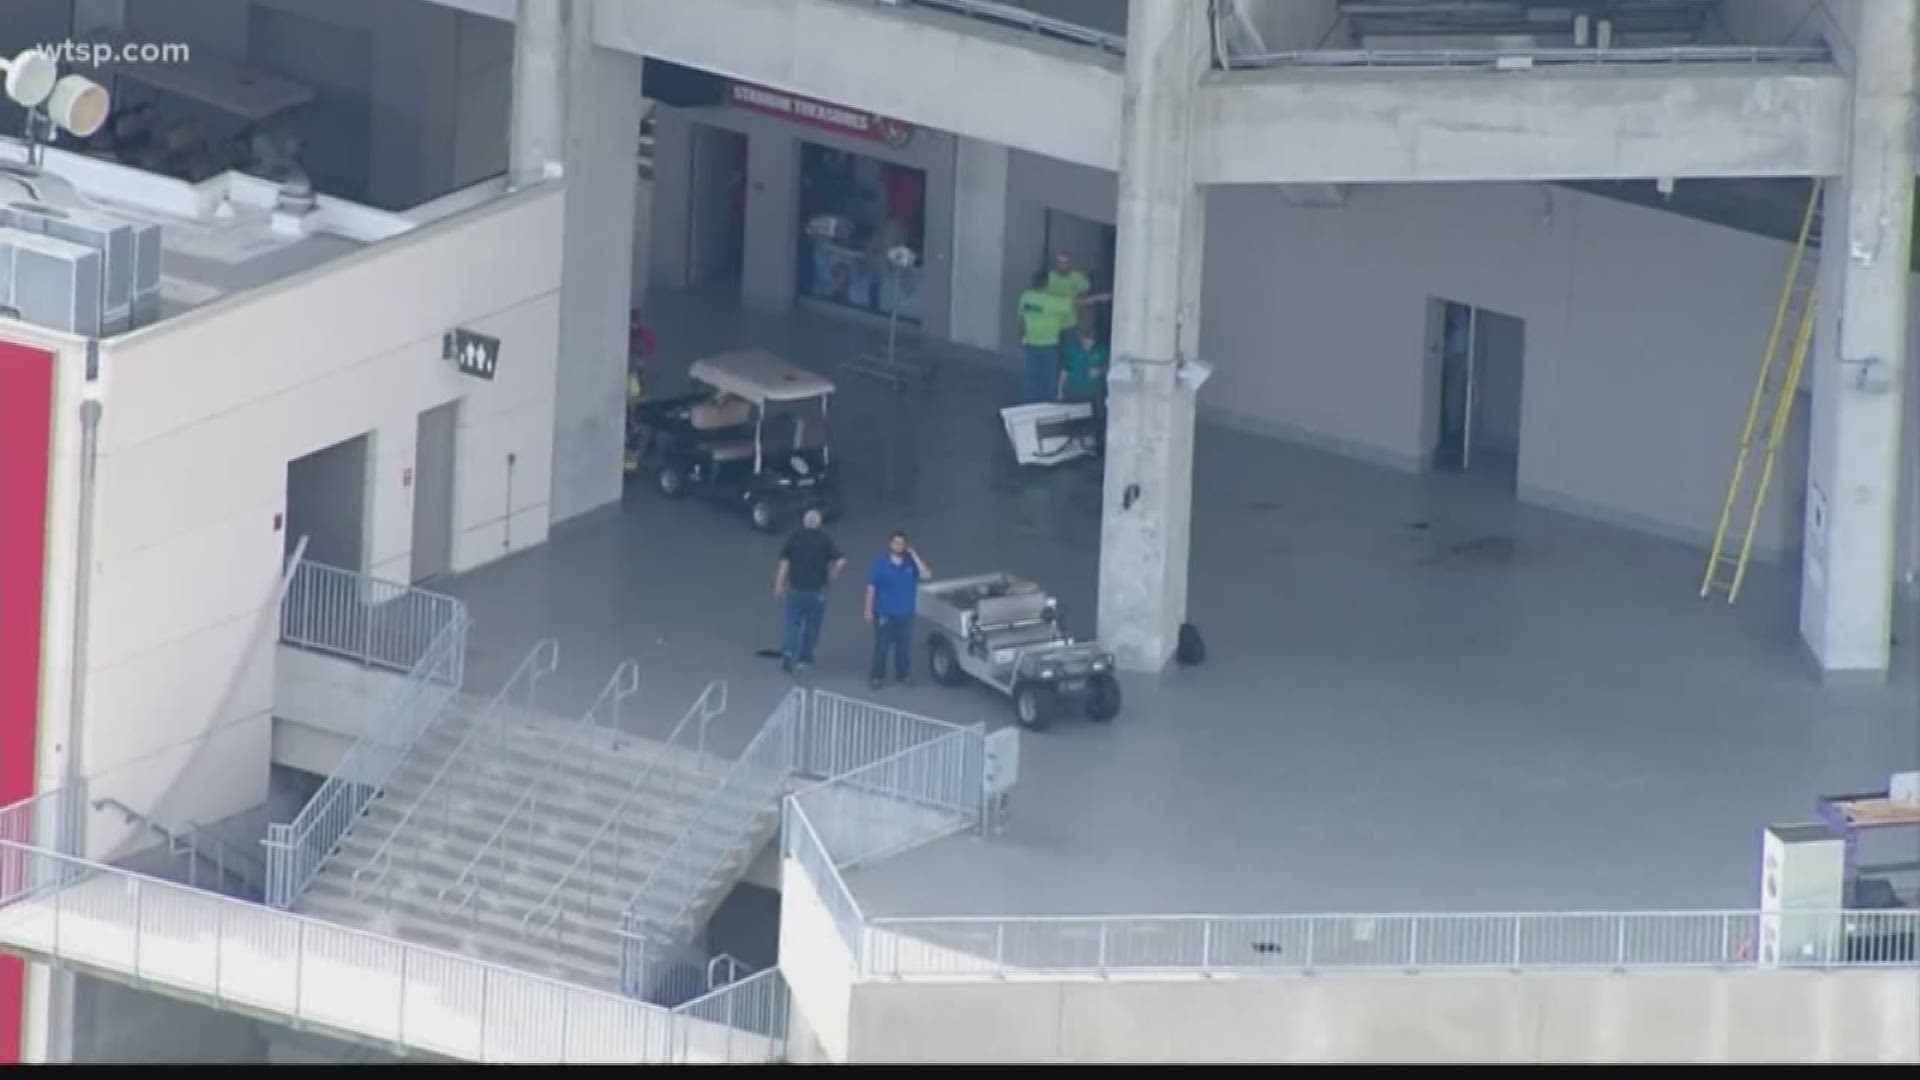 Two workers were injured when a gas line ignited Thursday afternoon at Raymond James Stadium in Tampa.

Tampa police say it happened while the men were working on the gas line in a vending area on the 300 level of the facility. https://on.wtsp.com/2OLGfis